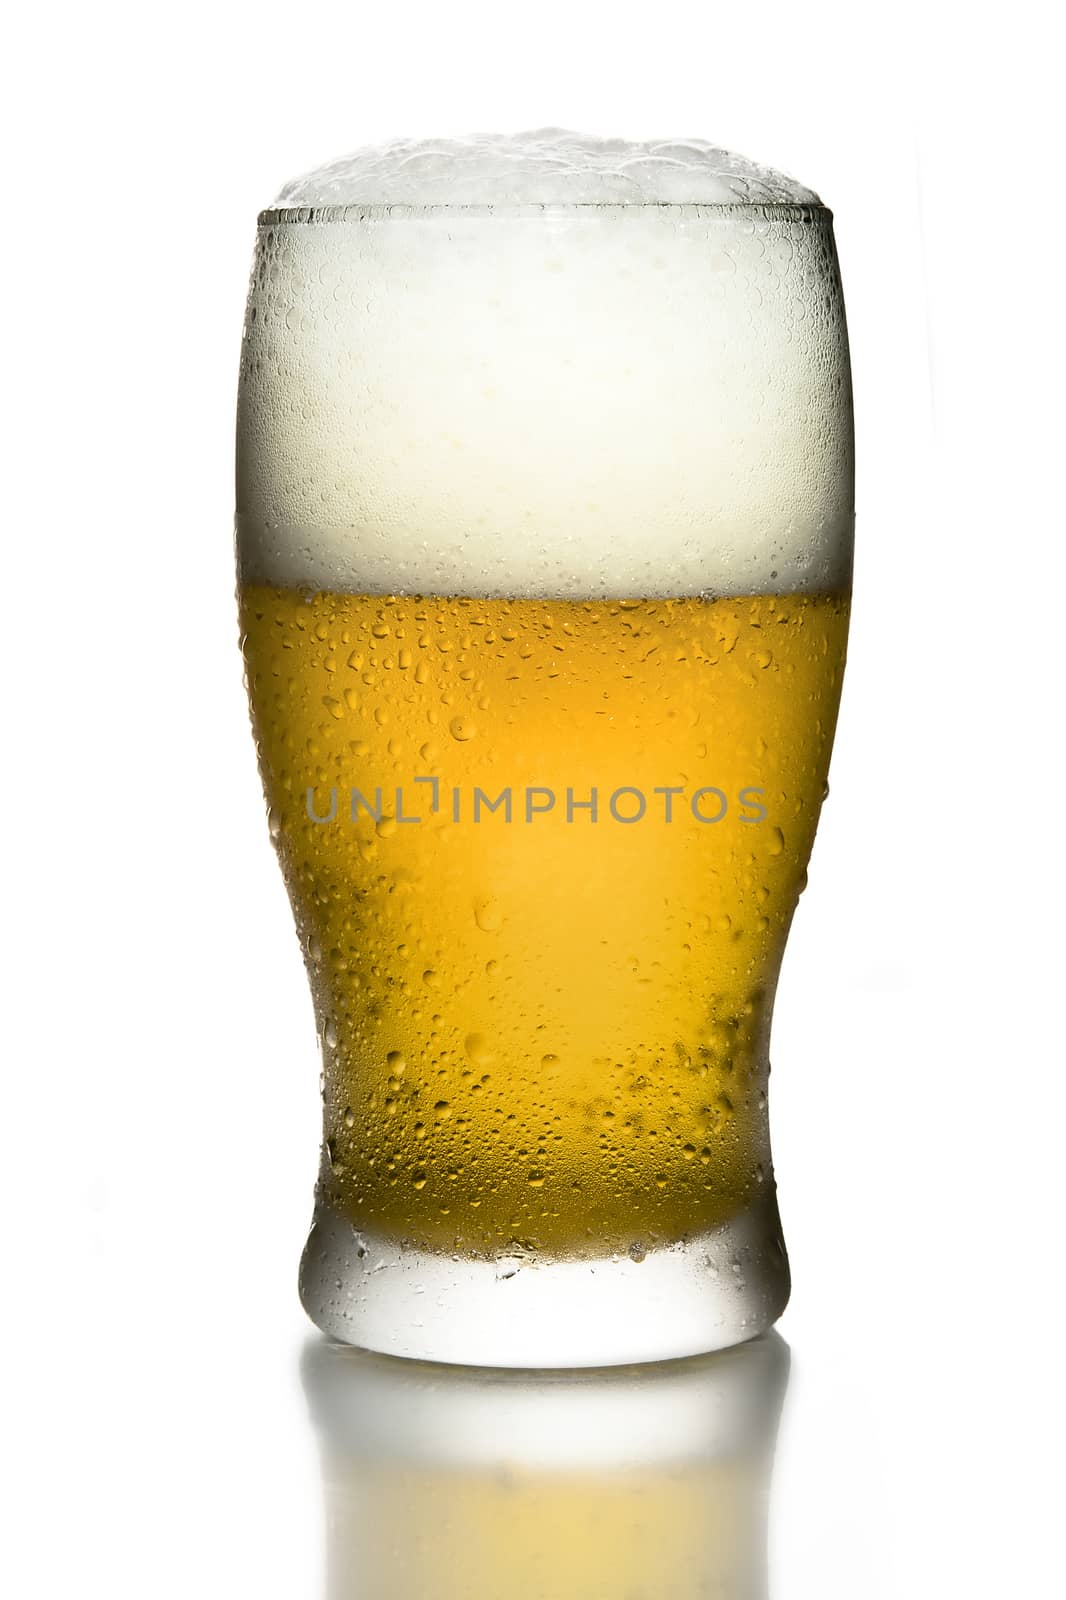 Full Cold Frosted Glass of Bear with foam on top in white background